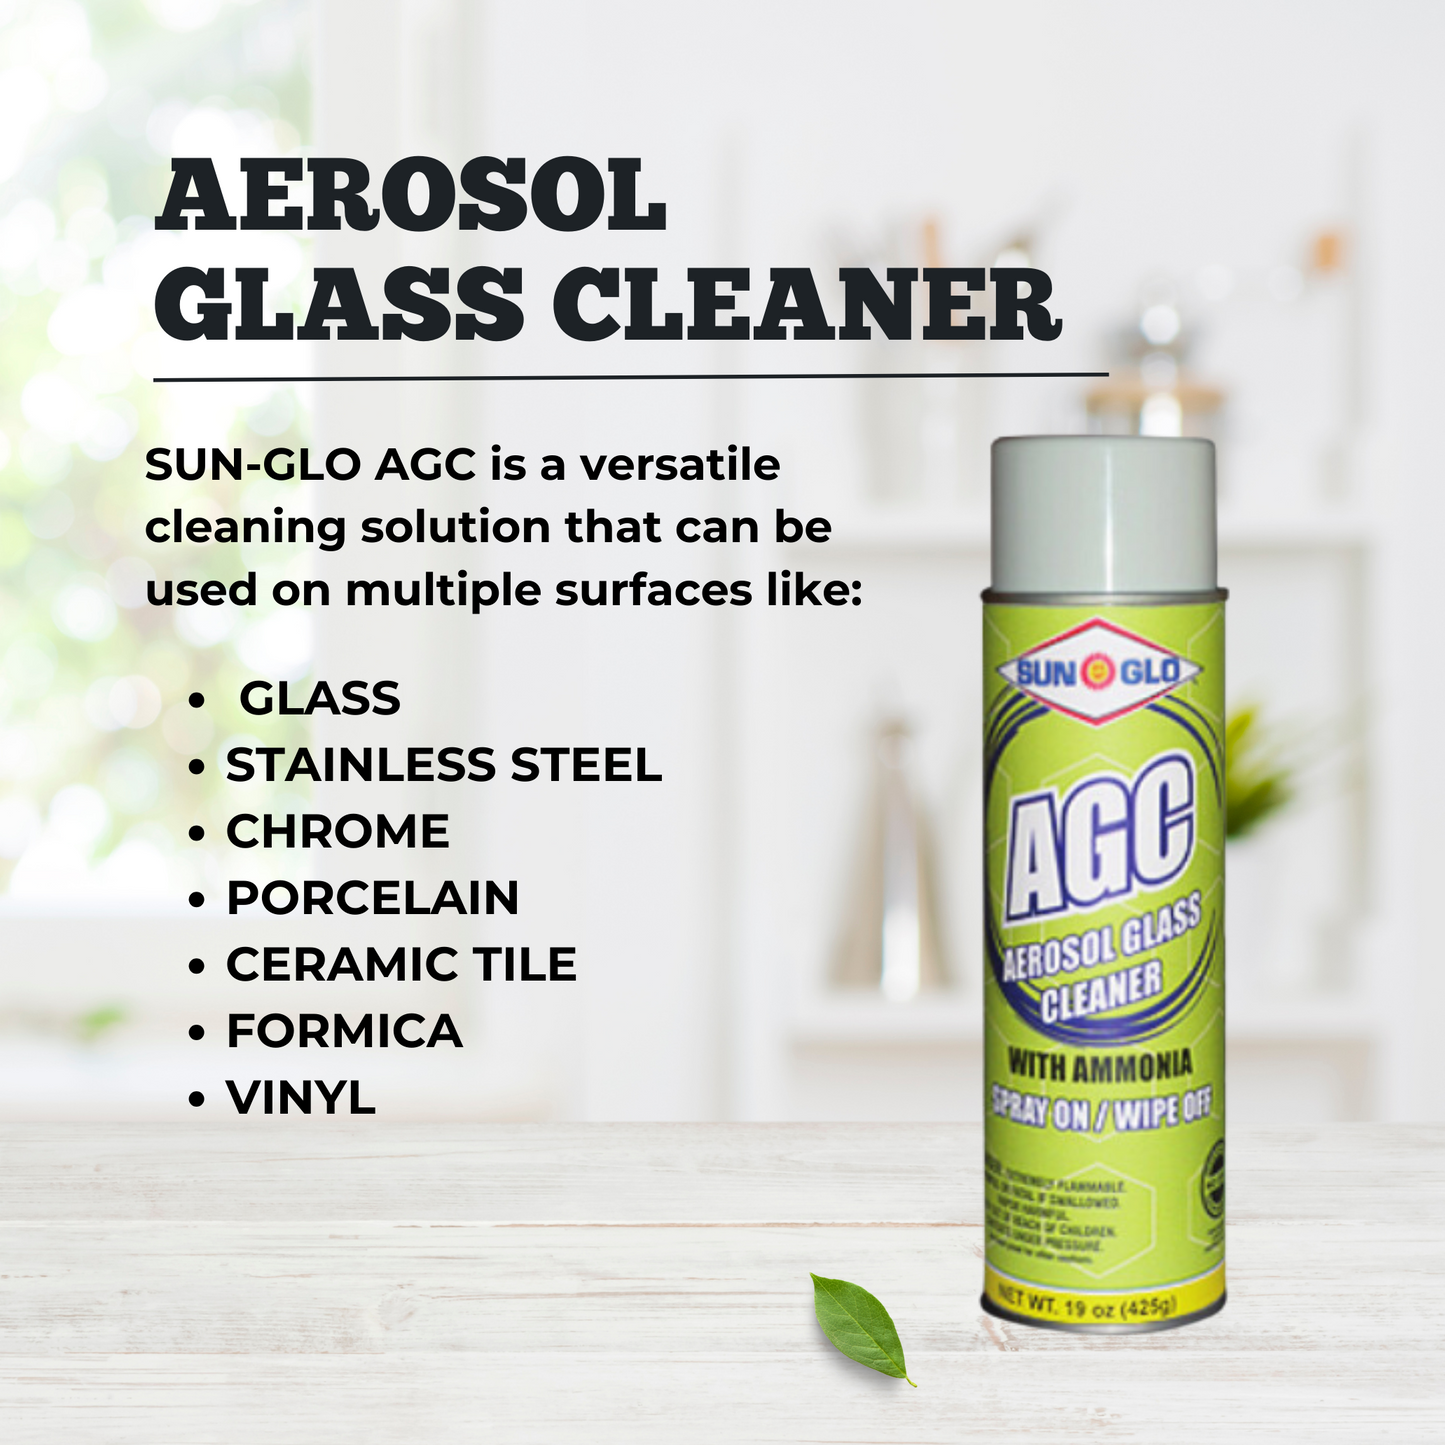 SUN-GLO Aerosol Glass Cleaner (AGC) - Ammonia Fortified Aerosol Glass & Multi-Surface Cleaner Spray Polish for All-Natural Sparkling, Brilliant, Streak-Free Shines